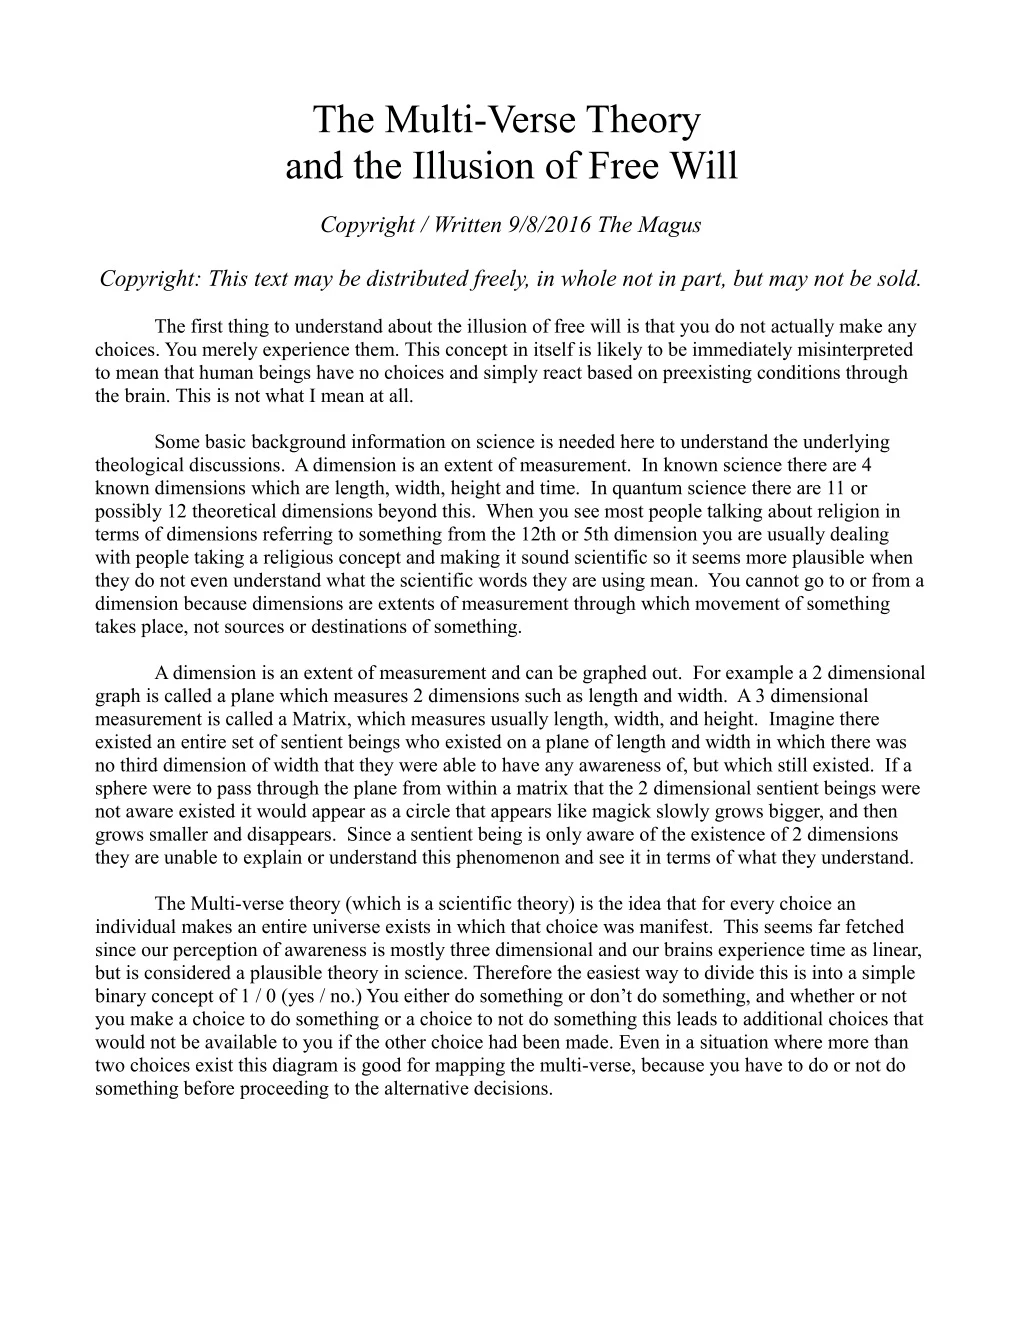 the multi verse theory and the illusion of free